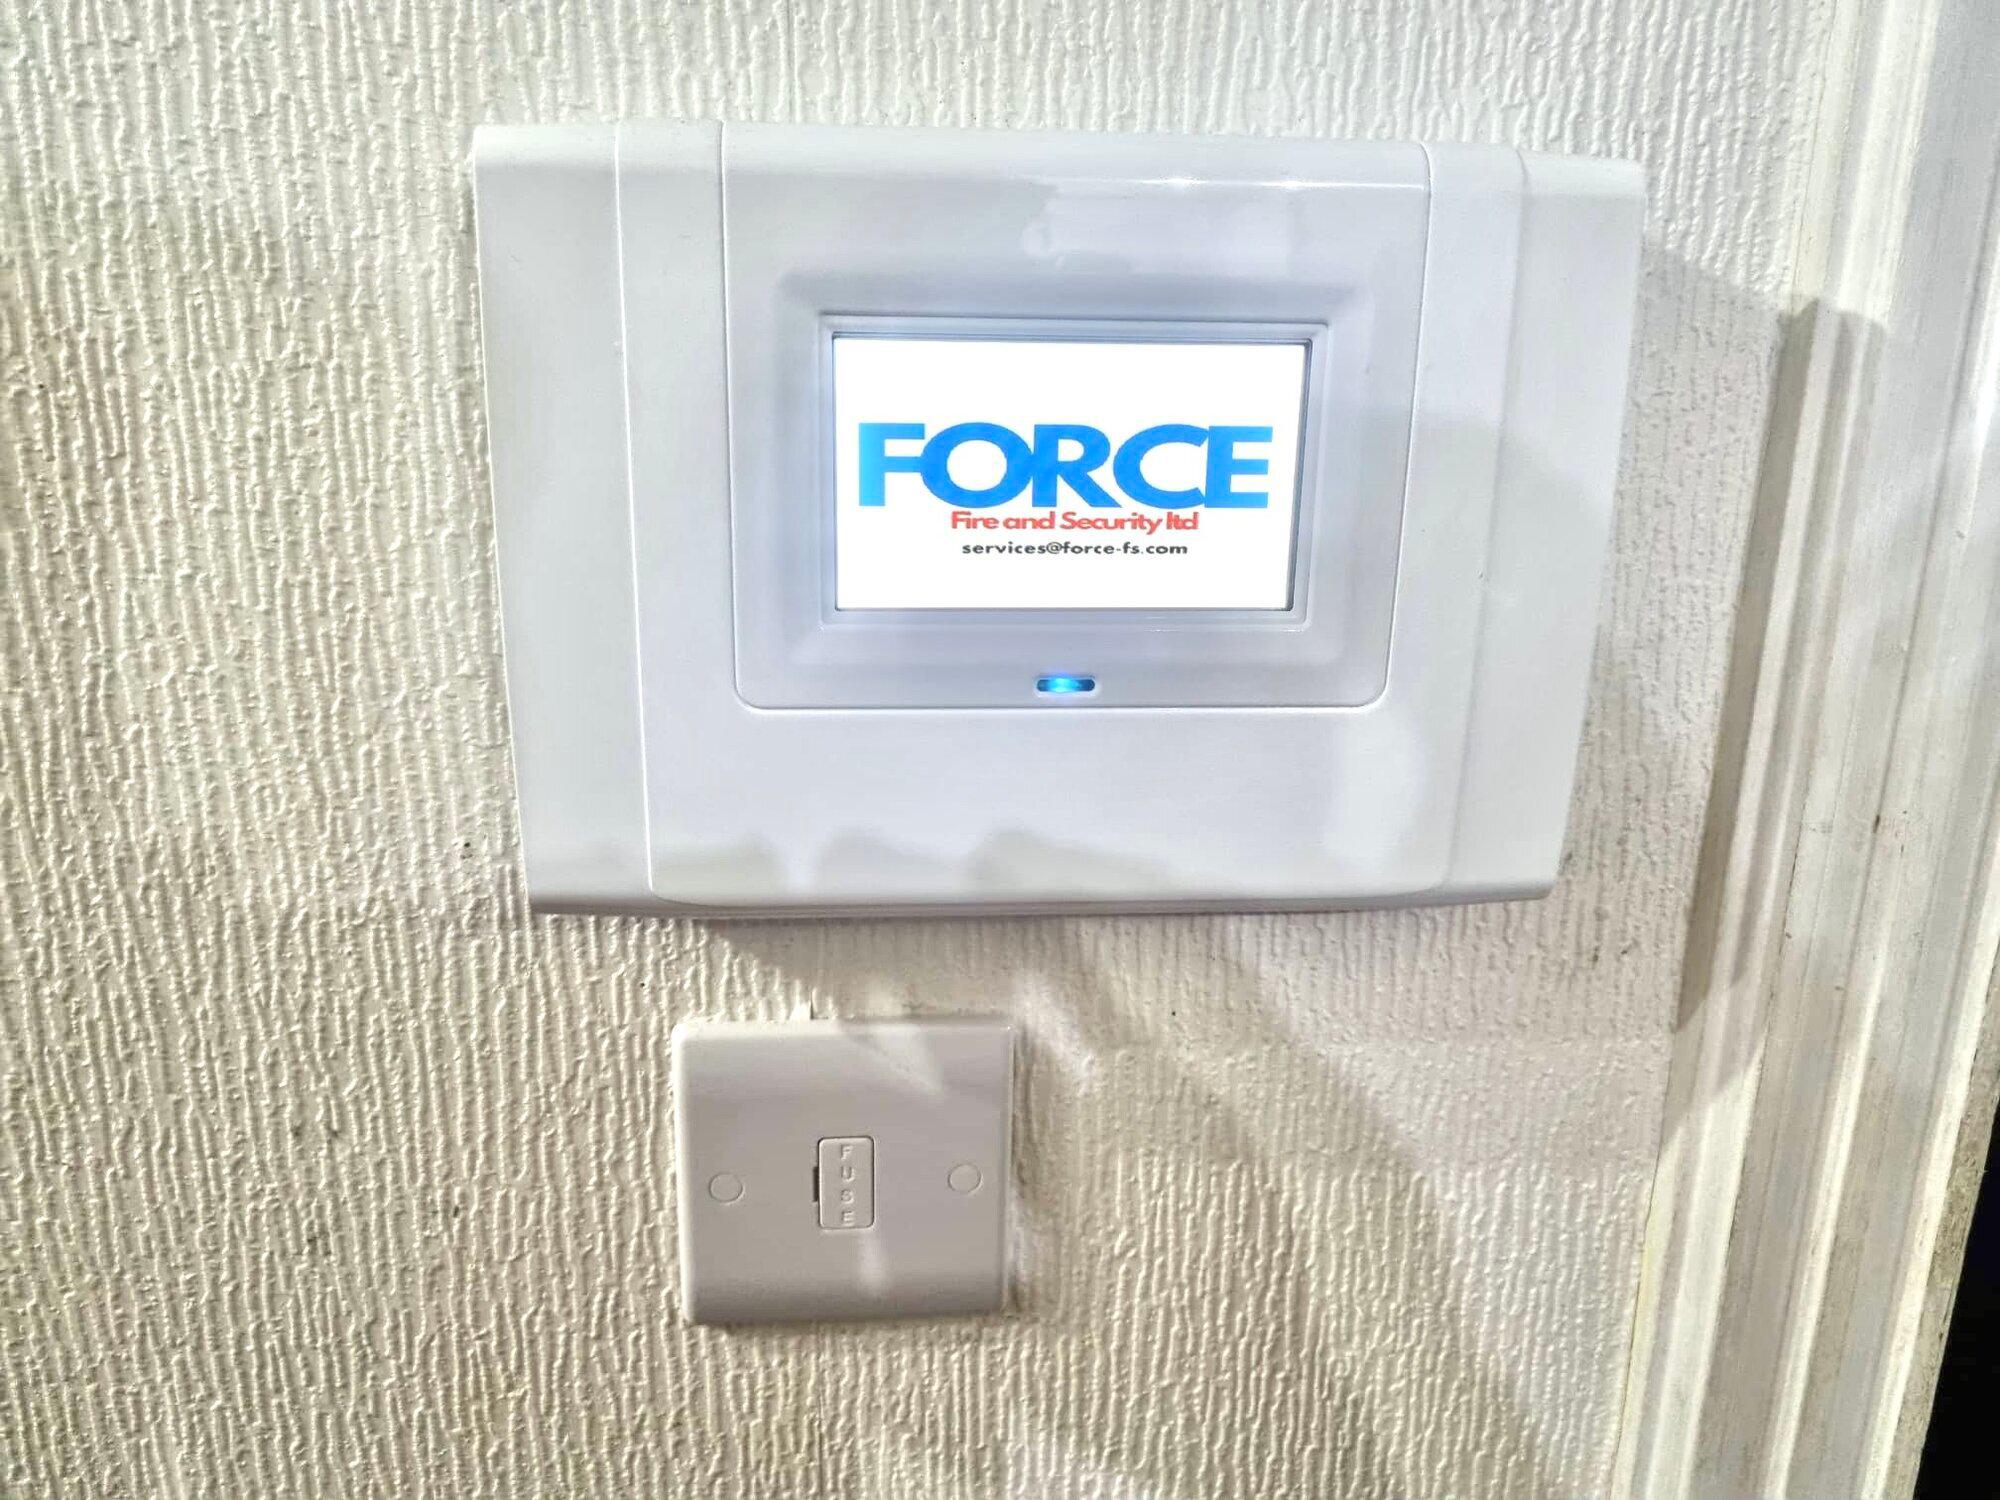 Force Fire and Security Ltd Stafford 07500 737873